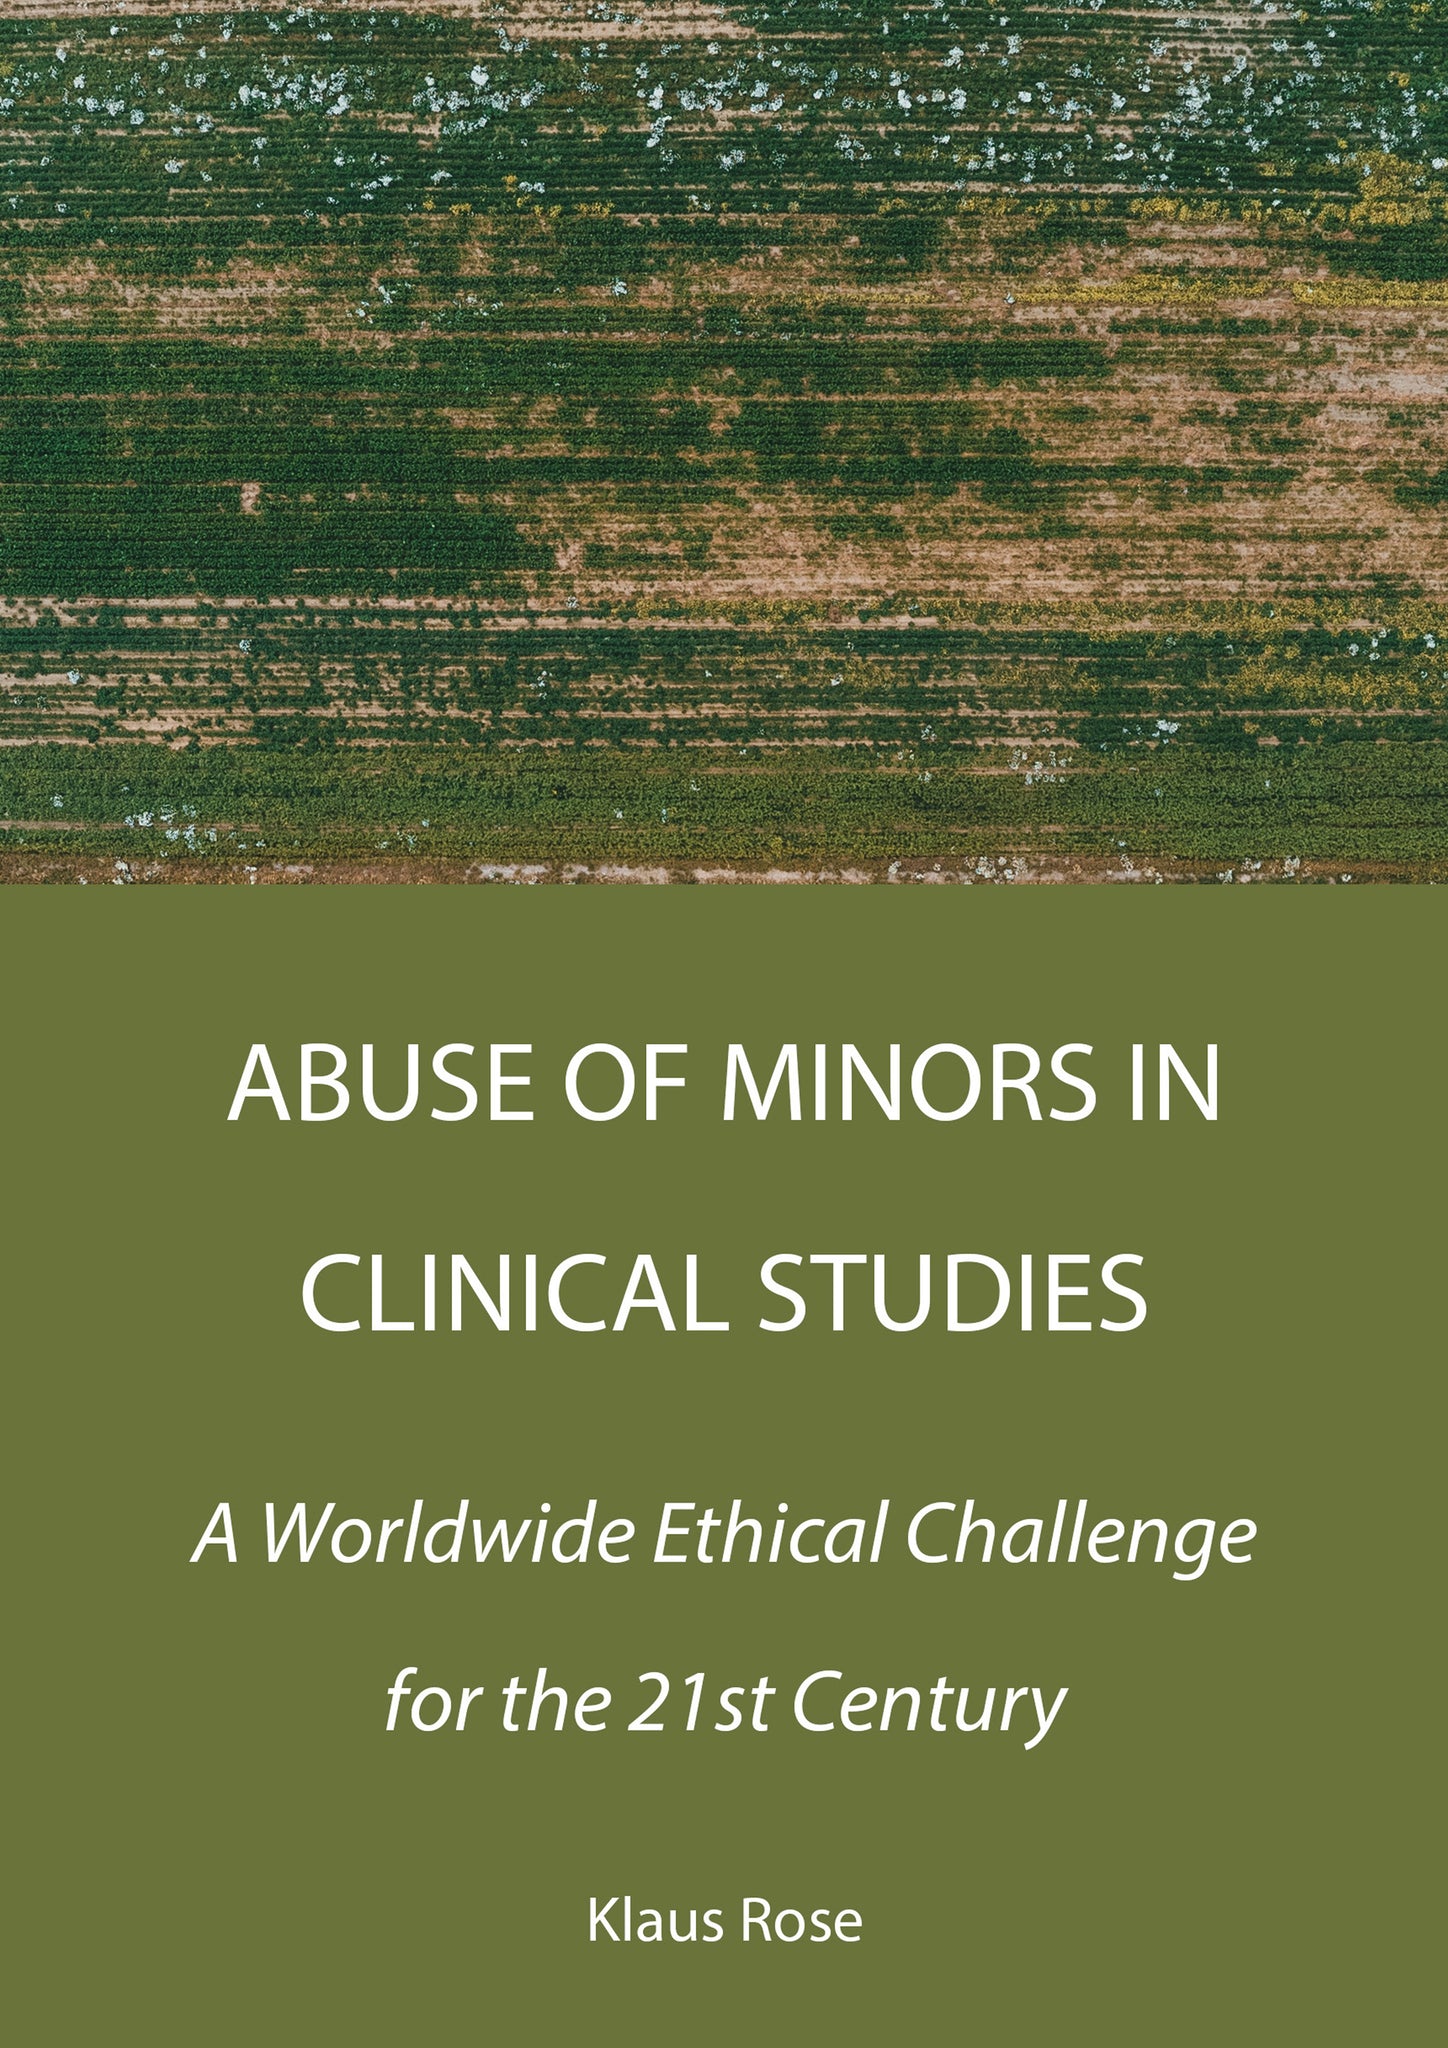 Abuse of Minors in Clinical Studies: A Worldwide Ethical Challenge for the 21st Century